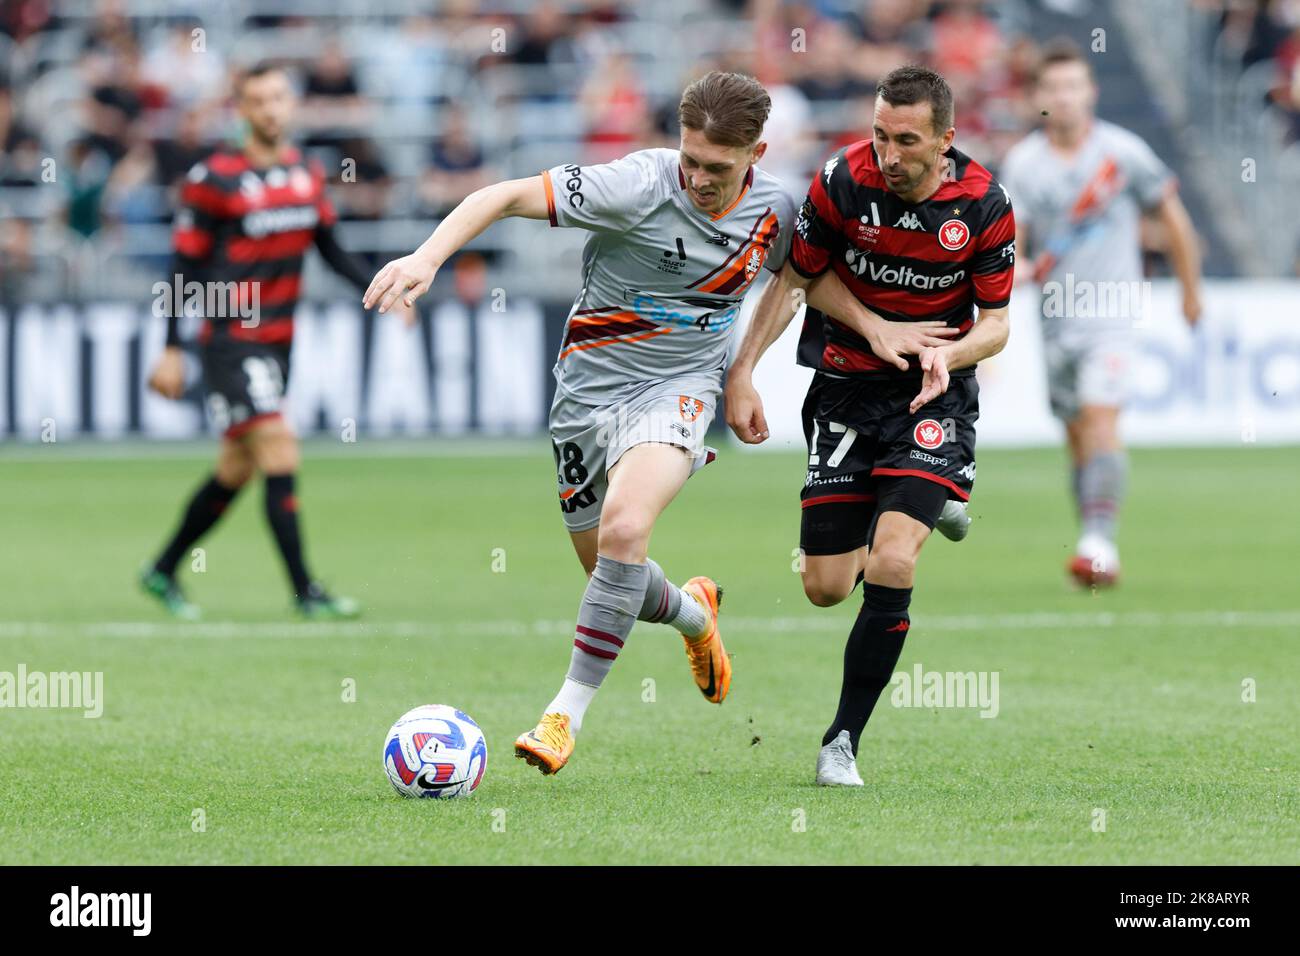 SYDNEY,AUSTRALIA-OCTOBER 22: Romain Amalfitano  of Wanderers competes for the ball with Joseph Knowles of Brisbane Roar during the match between Western Sydney Wanderers and Brisbane Roar at CommBank Stadium Credit: IOIO IMAGES/Alamy Live News Stock Photo